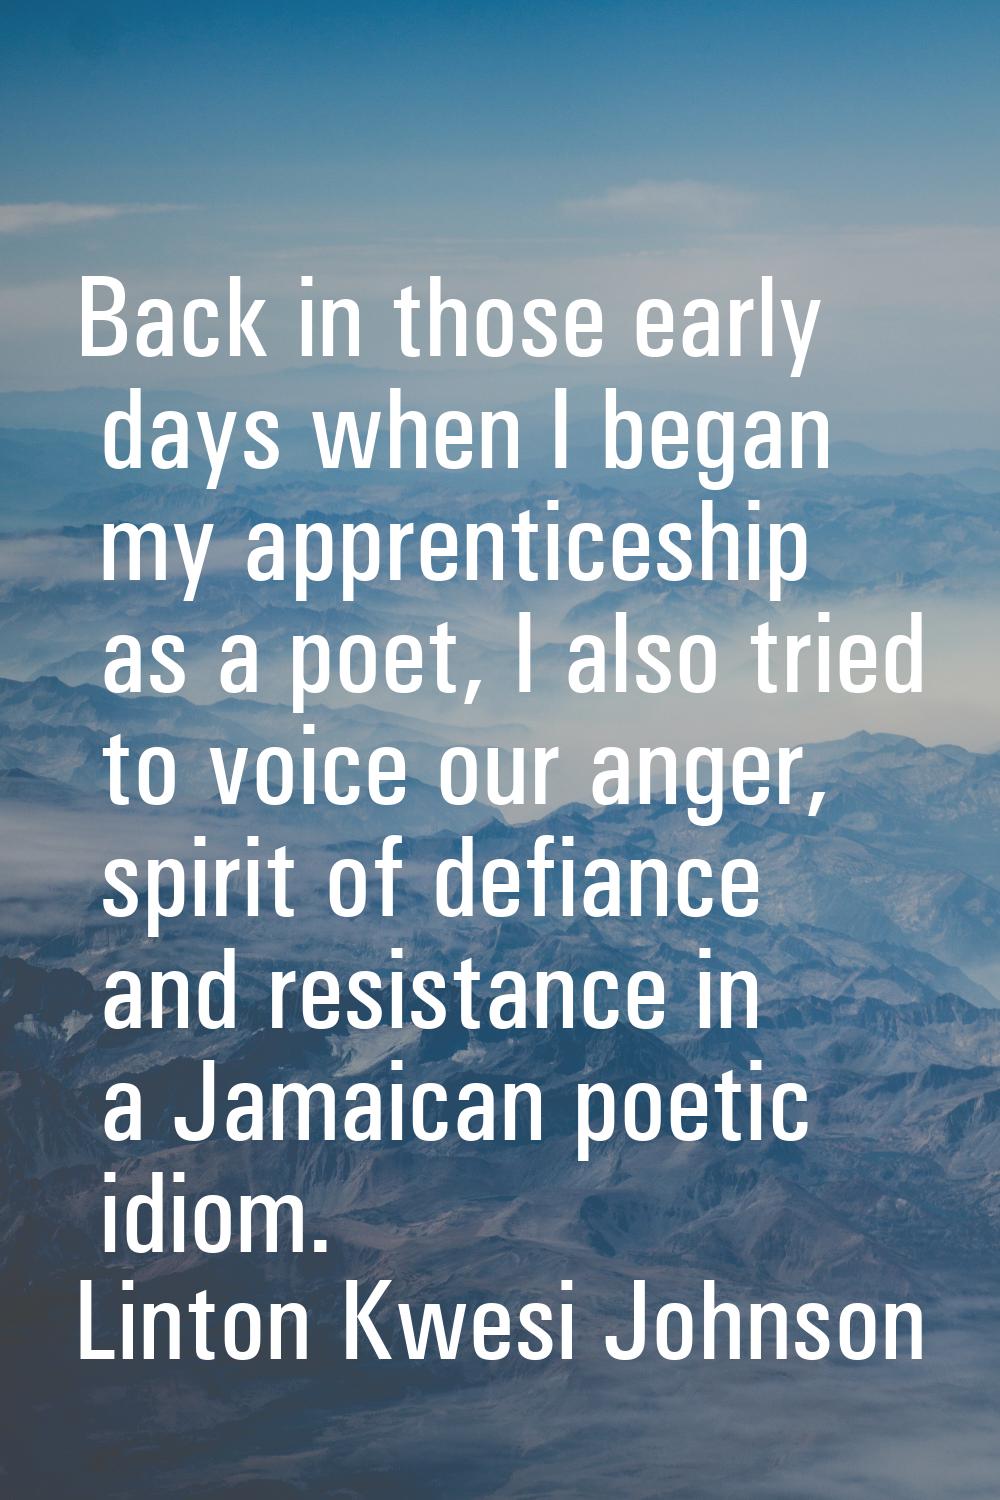 Back in those early days when I began my apprenticeship as a poet, I also tried to voice our anger,